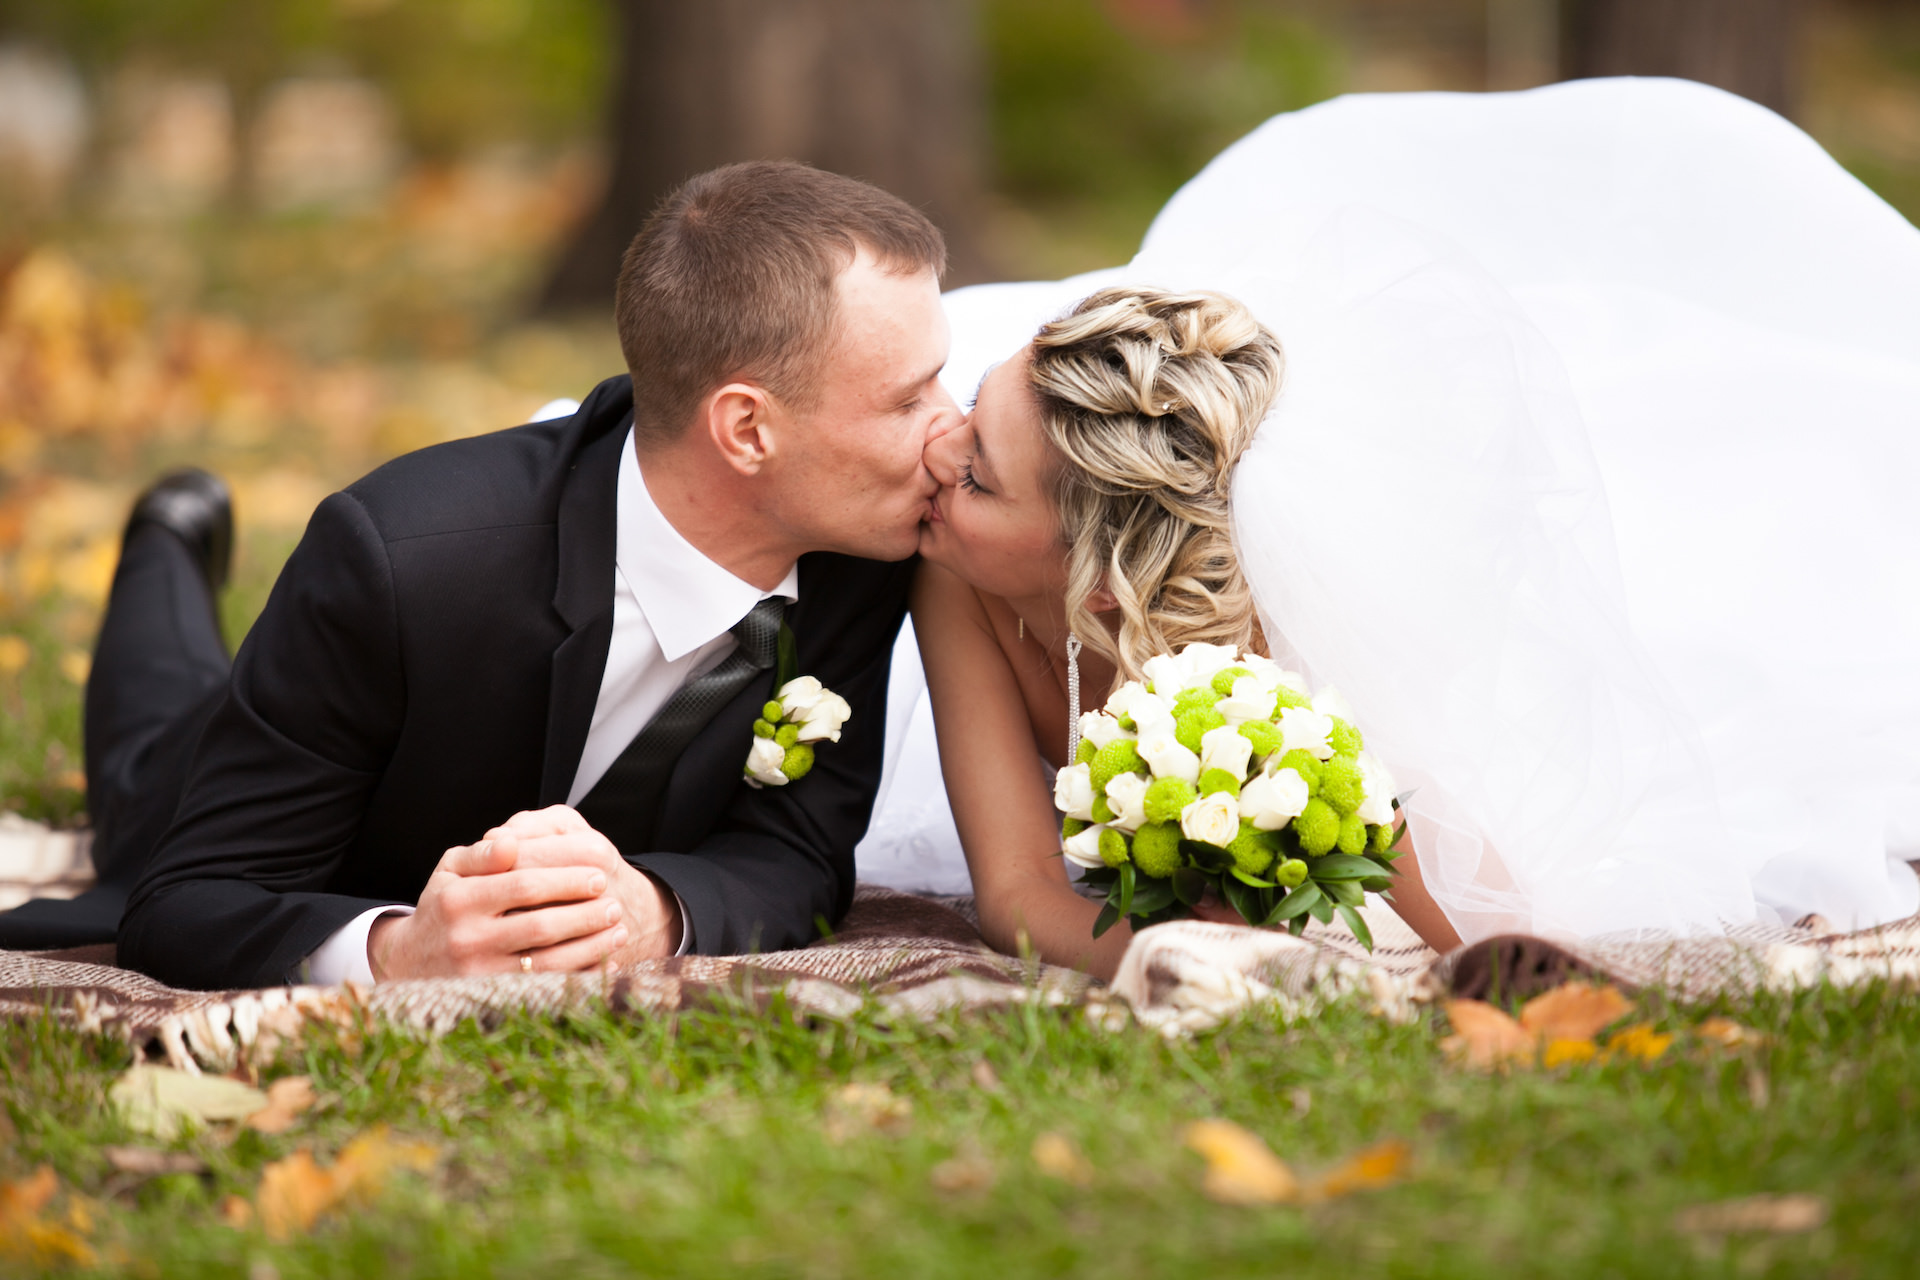 newly married couple lying on grass at park and kissing